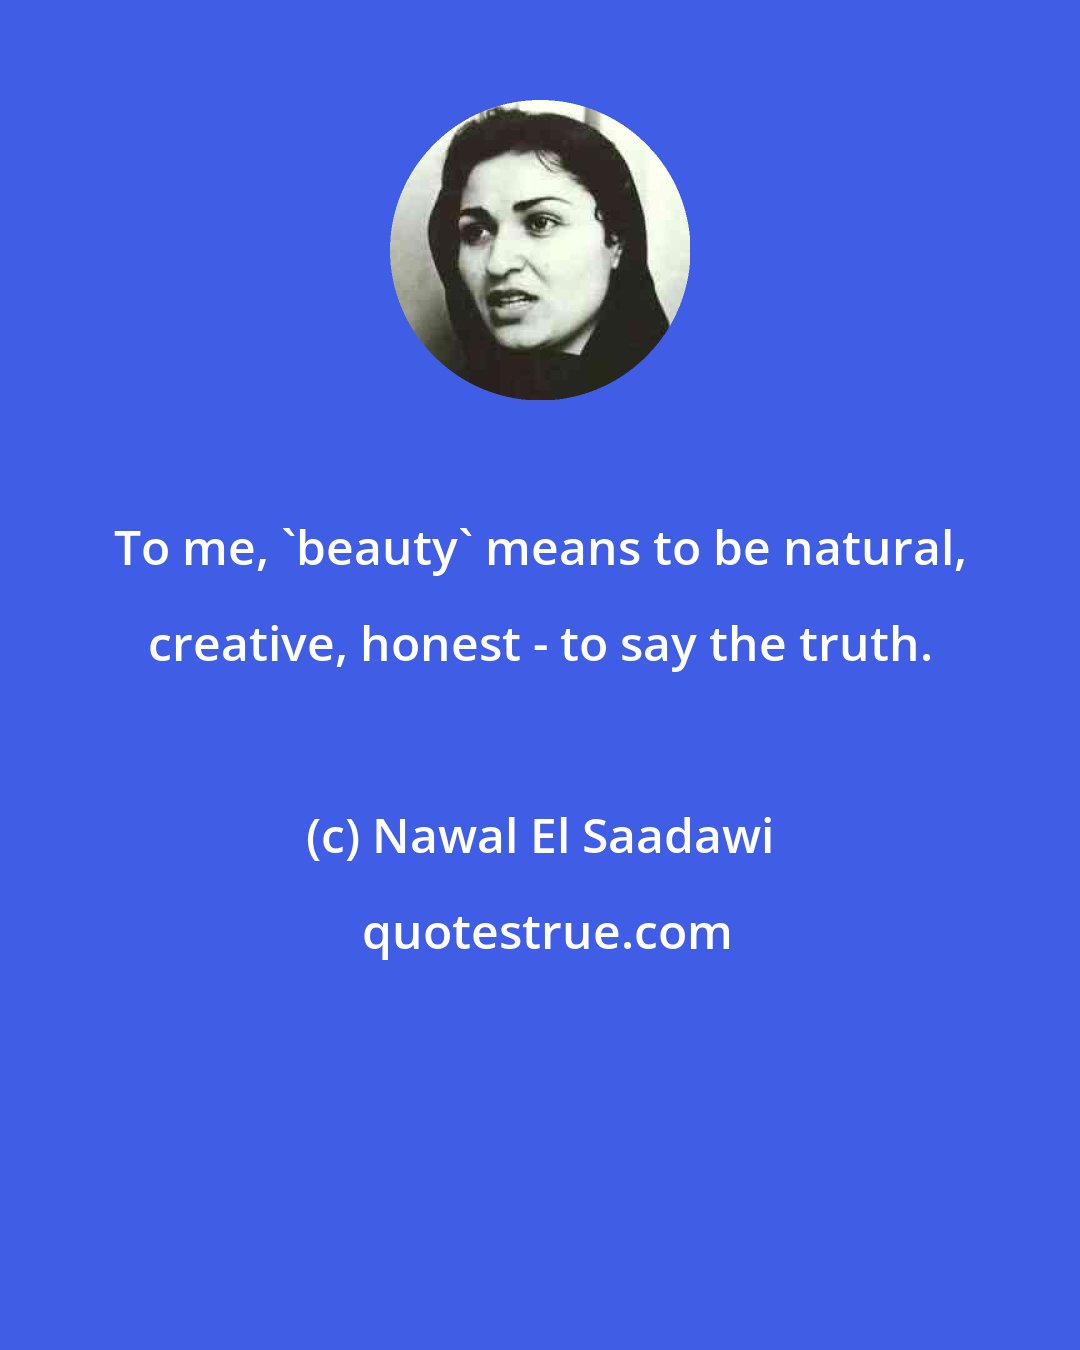 Nawal El Saadawi: To me, 'beauty' means to be natural, creative, honest - to say the truth.